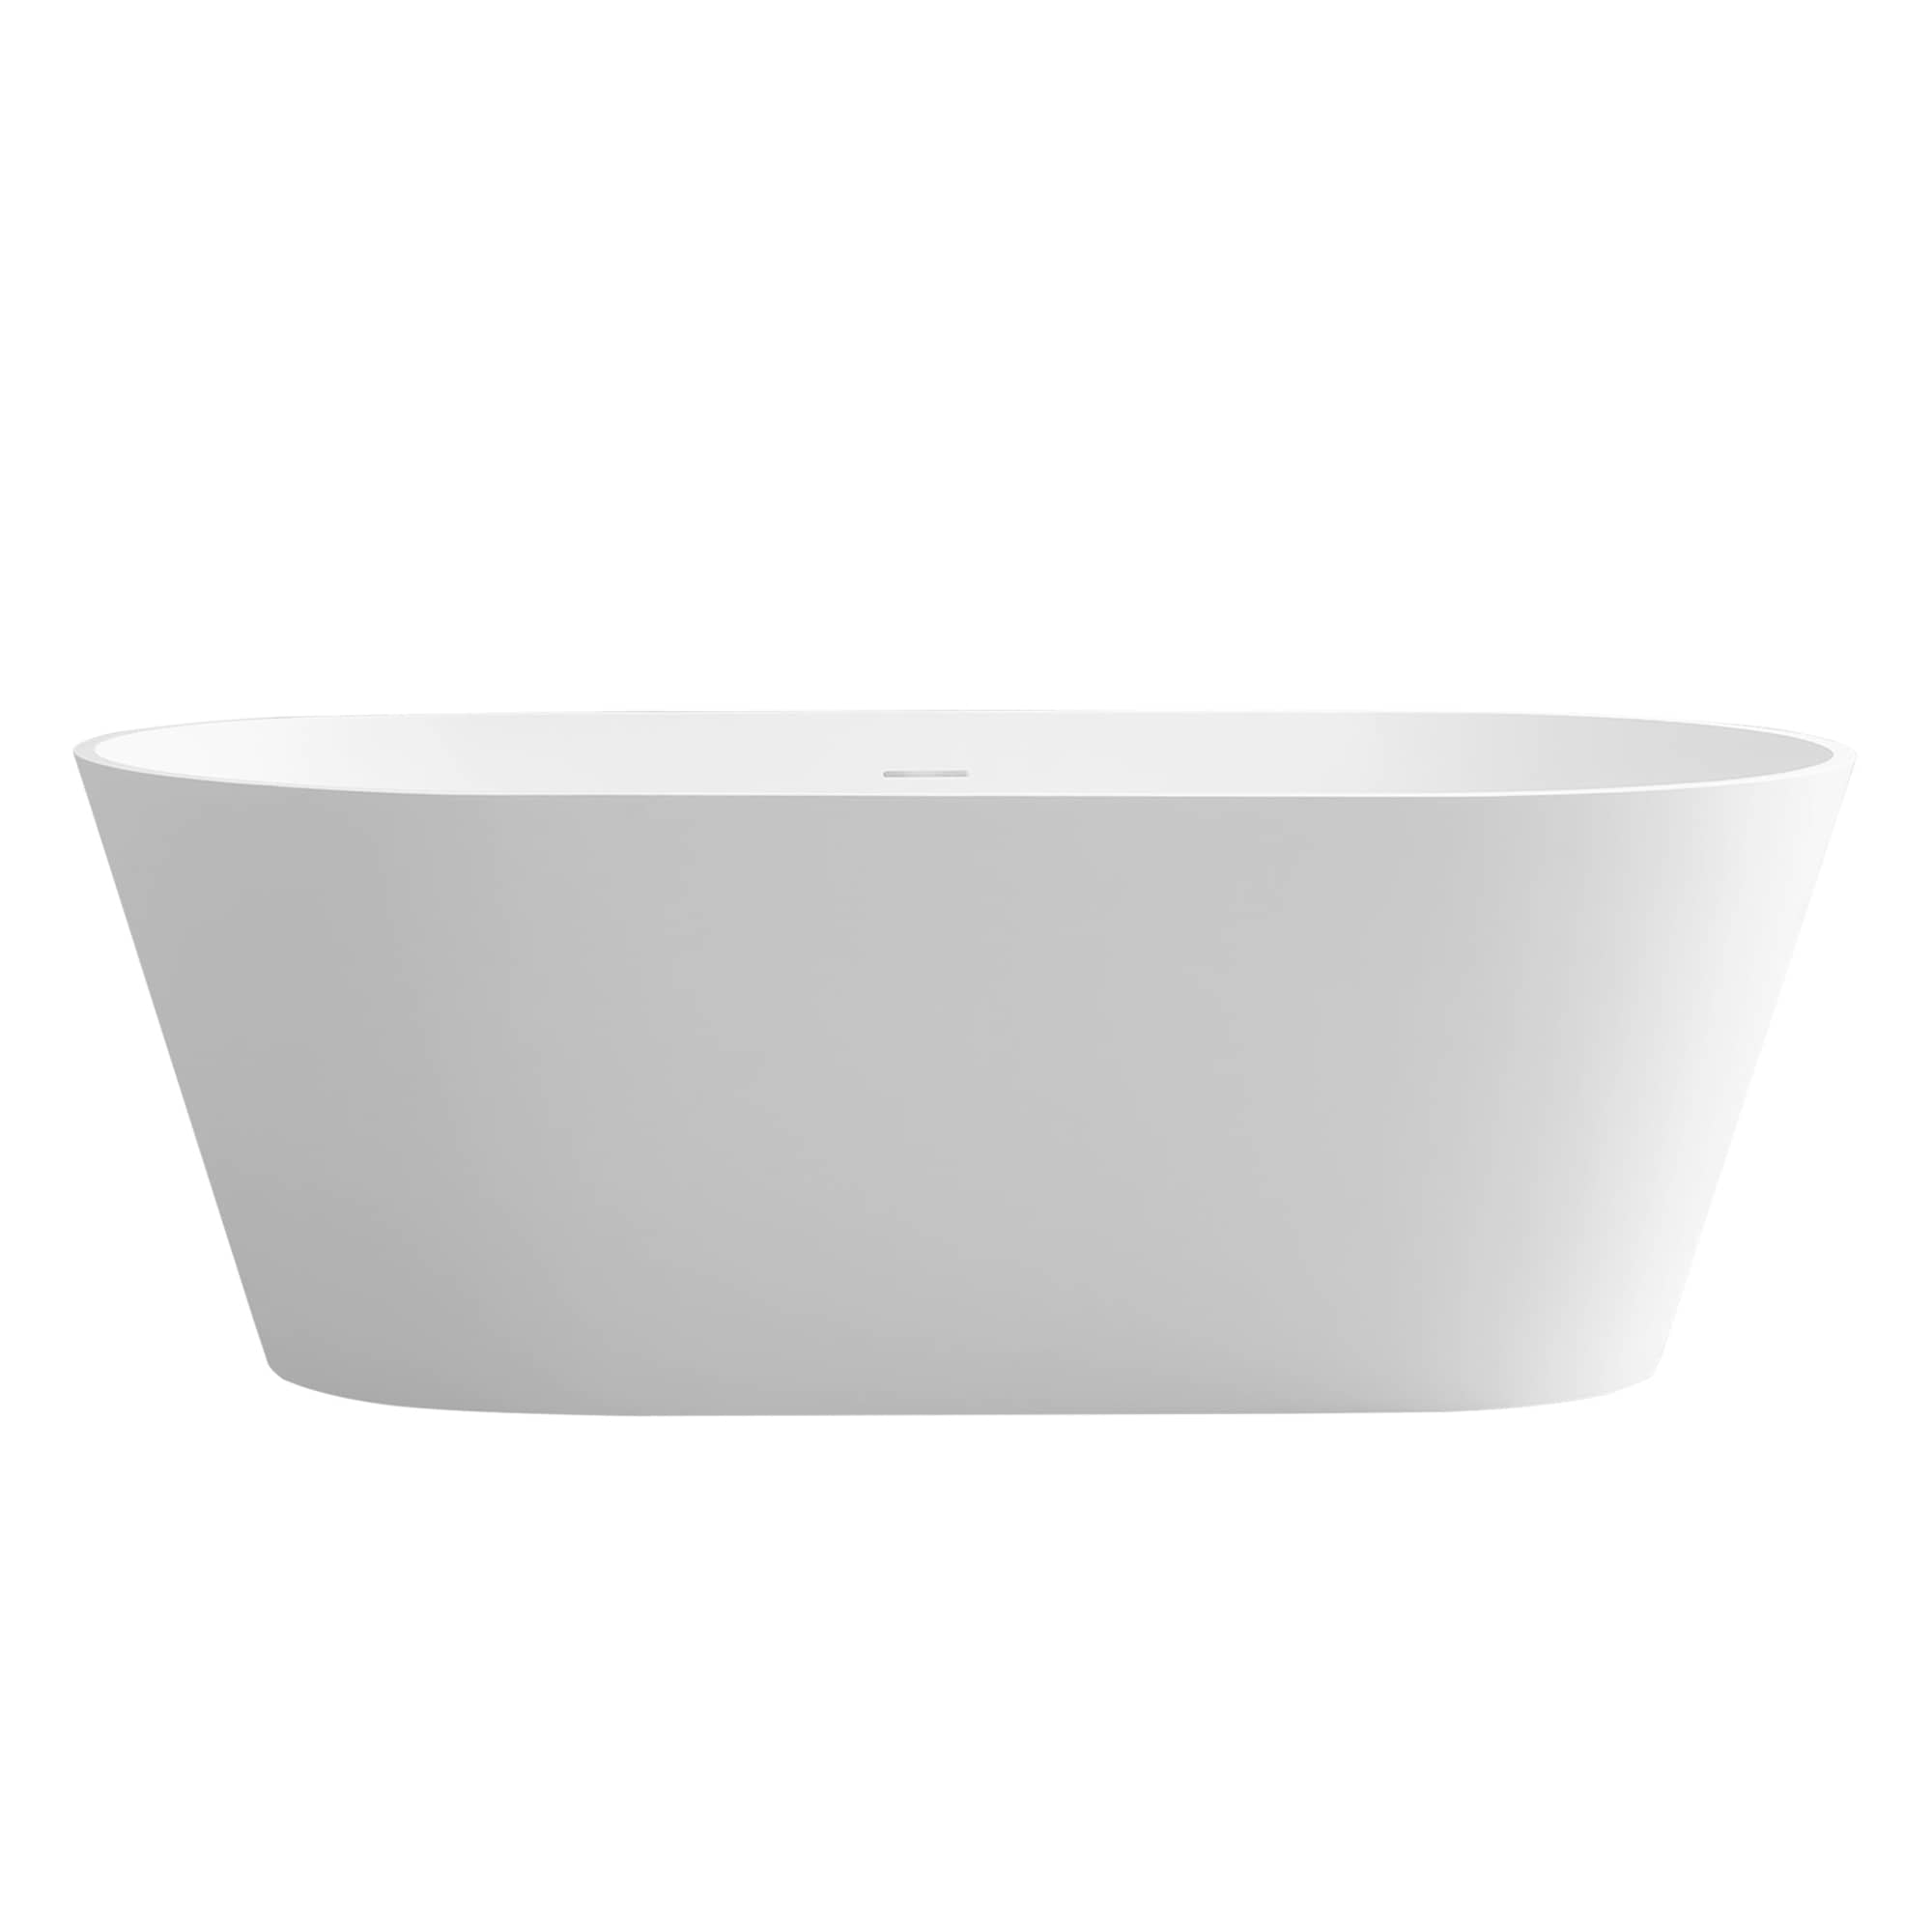 63" Solid Surface Freestanding Tub, Stone Resin Soaking Tub with Overflow and Drain, Matte White Option